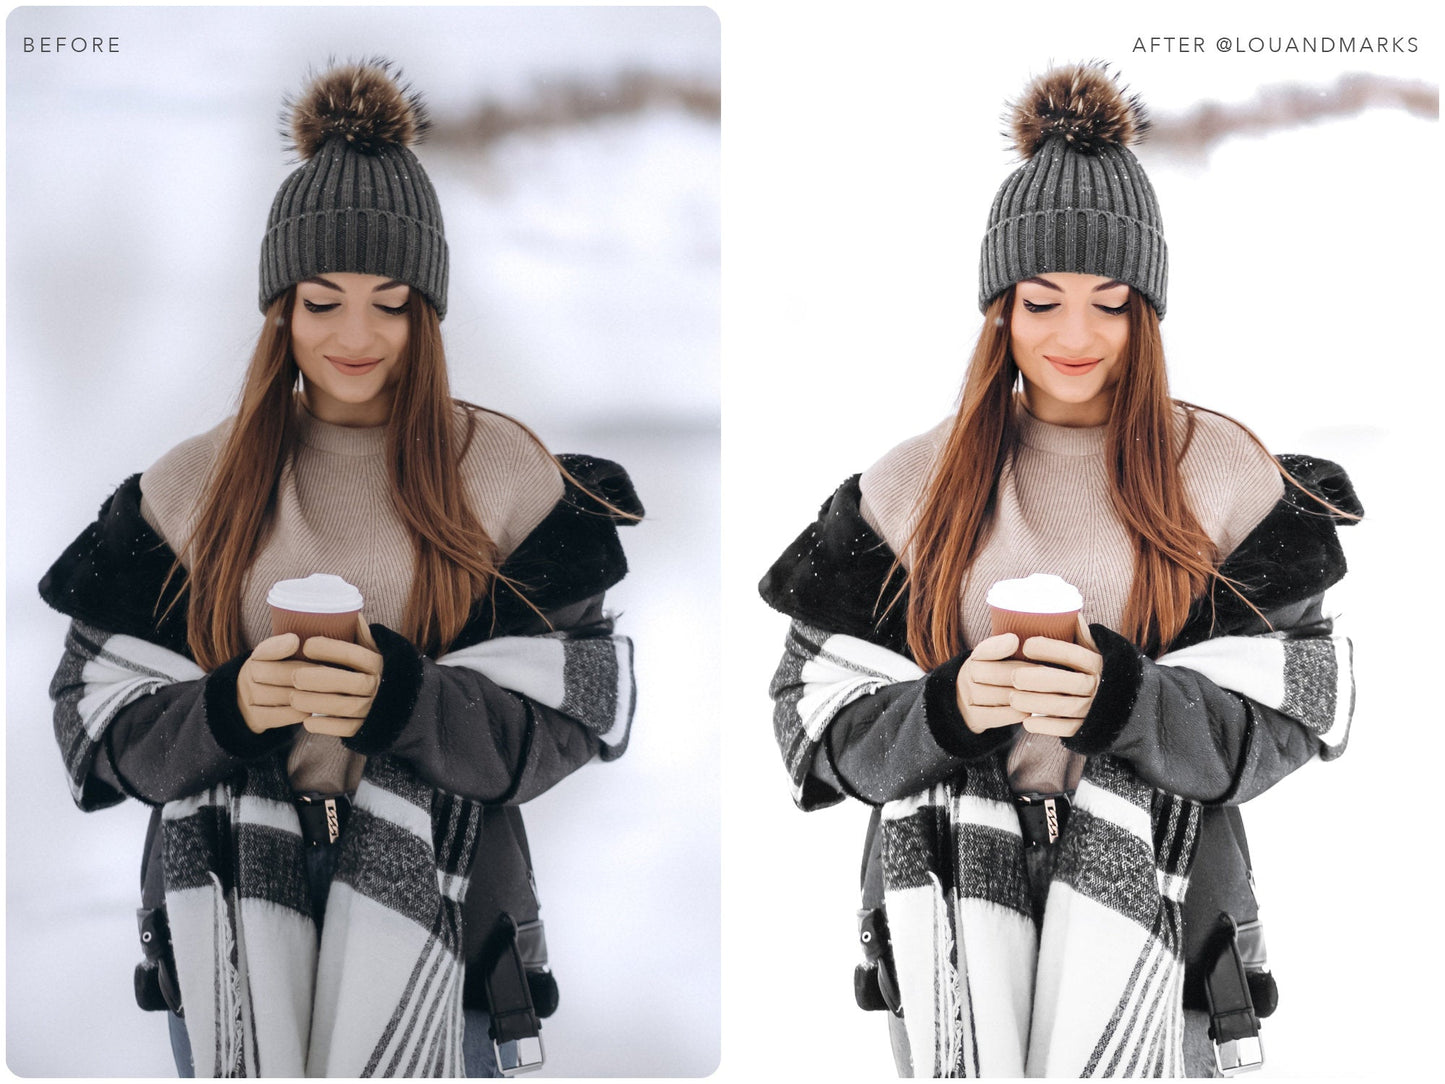 Load image into Gallery viewer, 15 Winter Mobile Lightroom Presets White, Clean Photo Editing Filter for Lifestyle Blogger, Instagram Influencer Outdoor Preset
